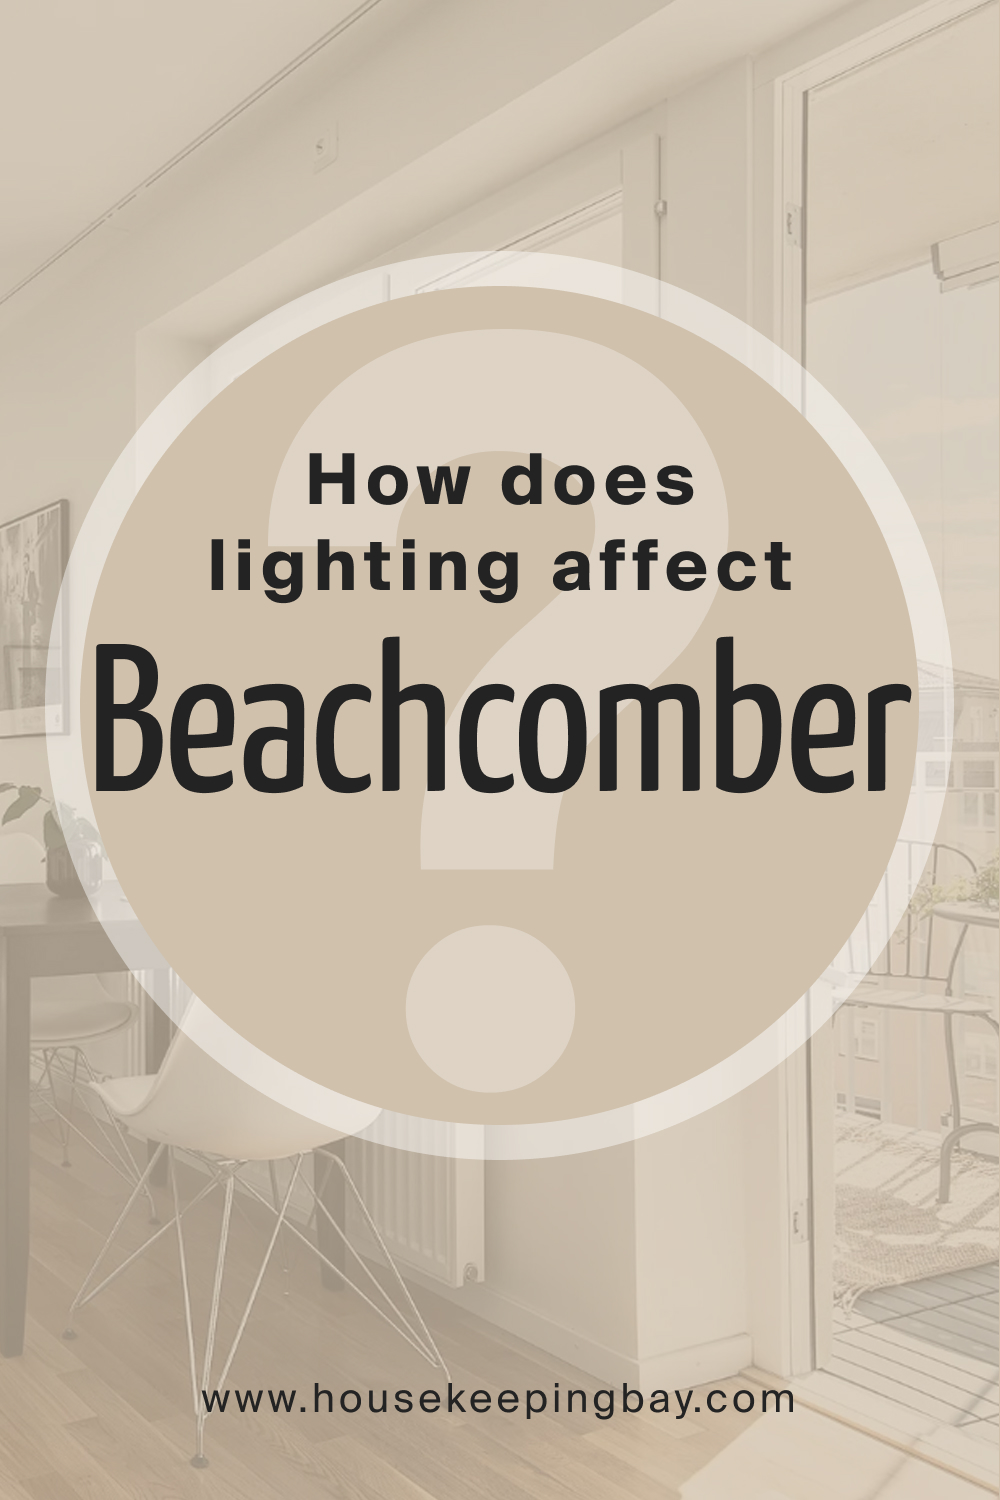 How does lighting affect SW 9617 Beachcomber